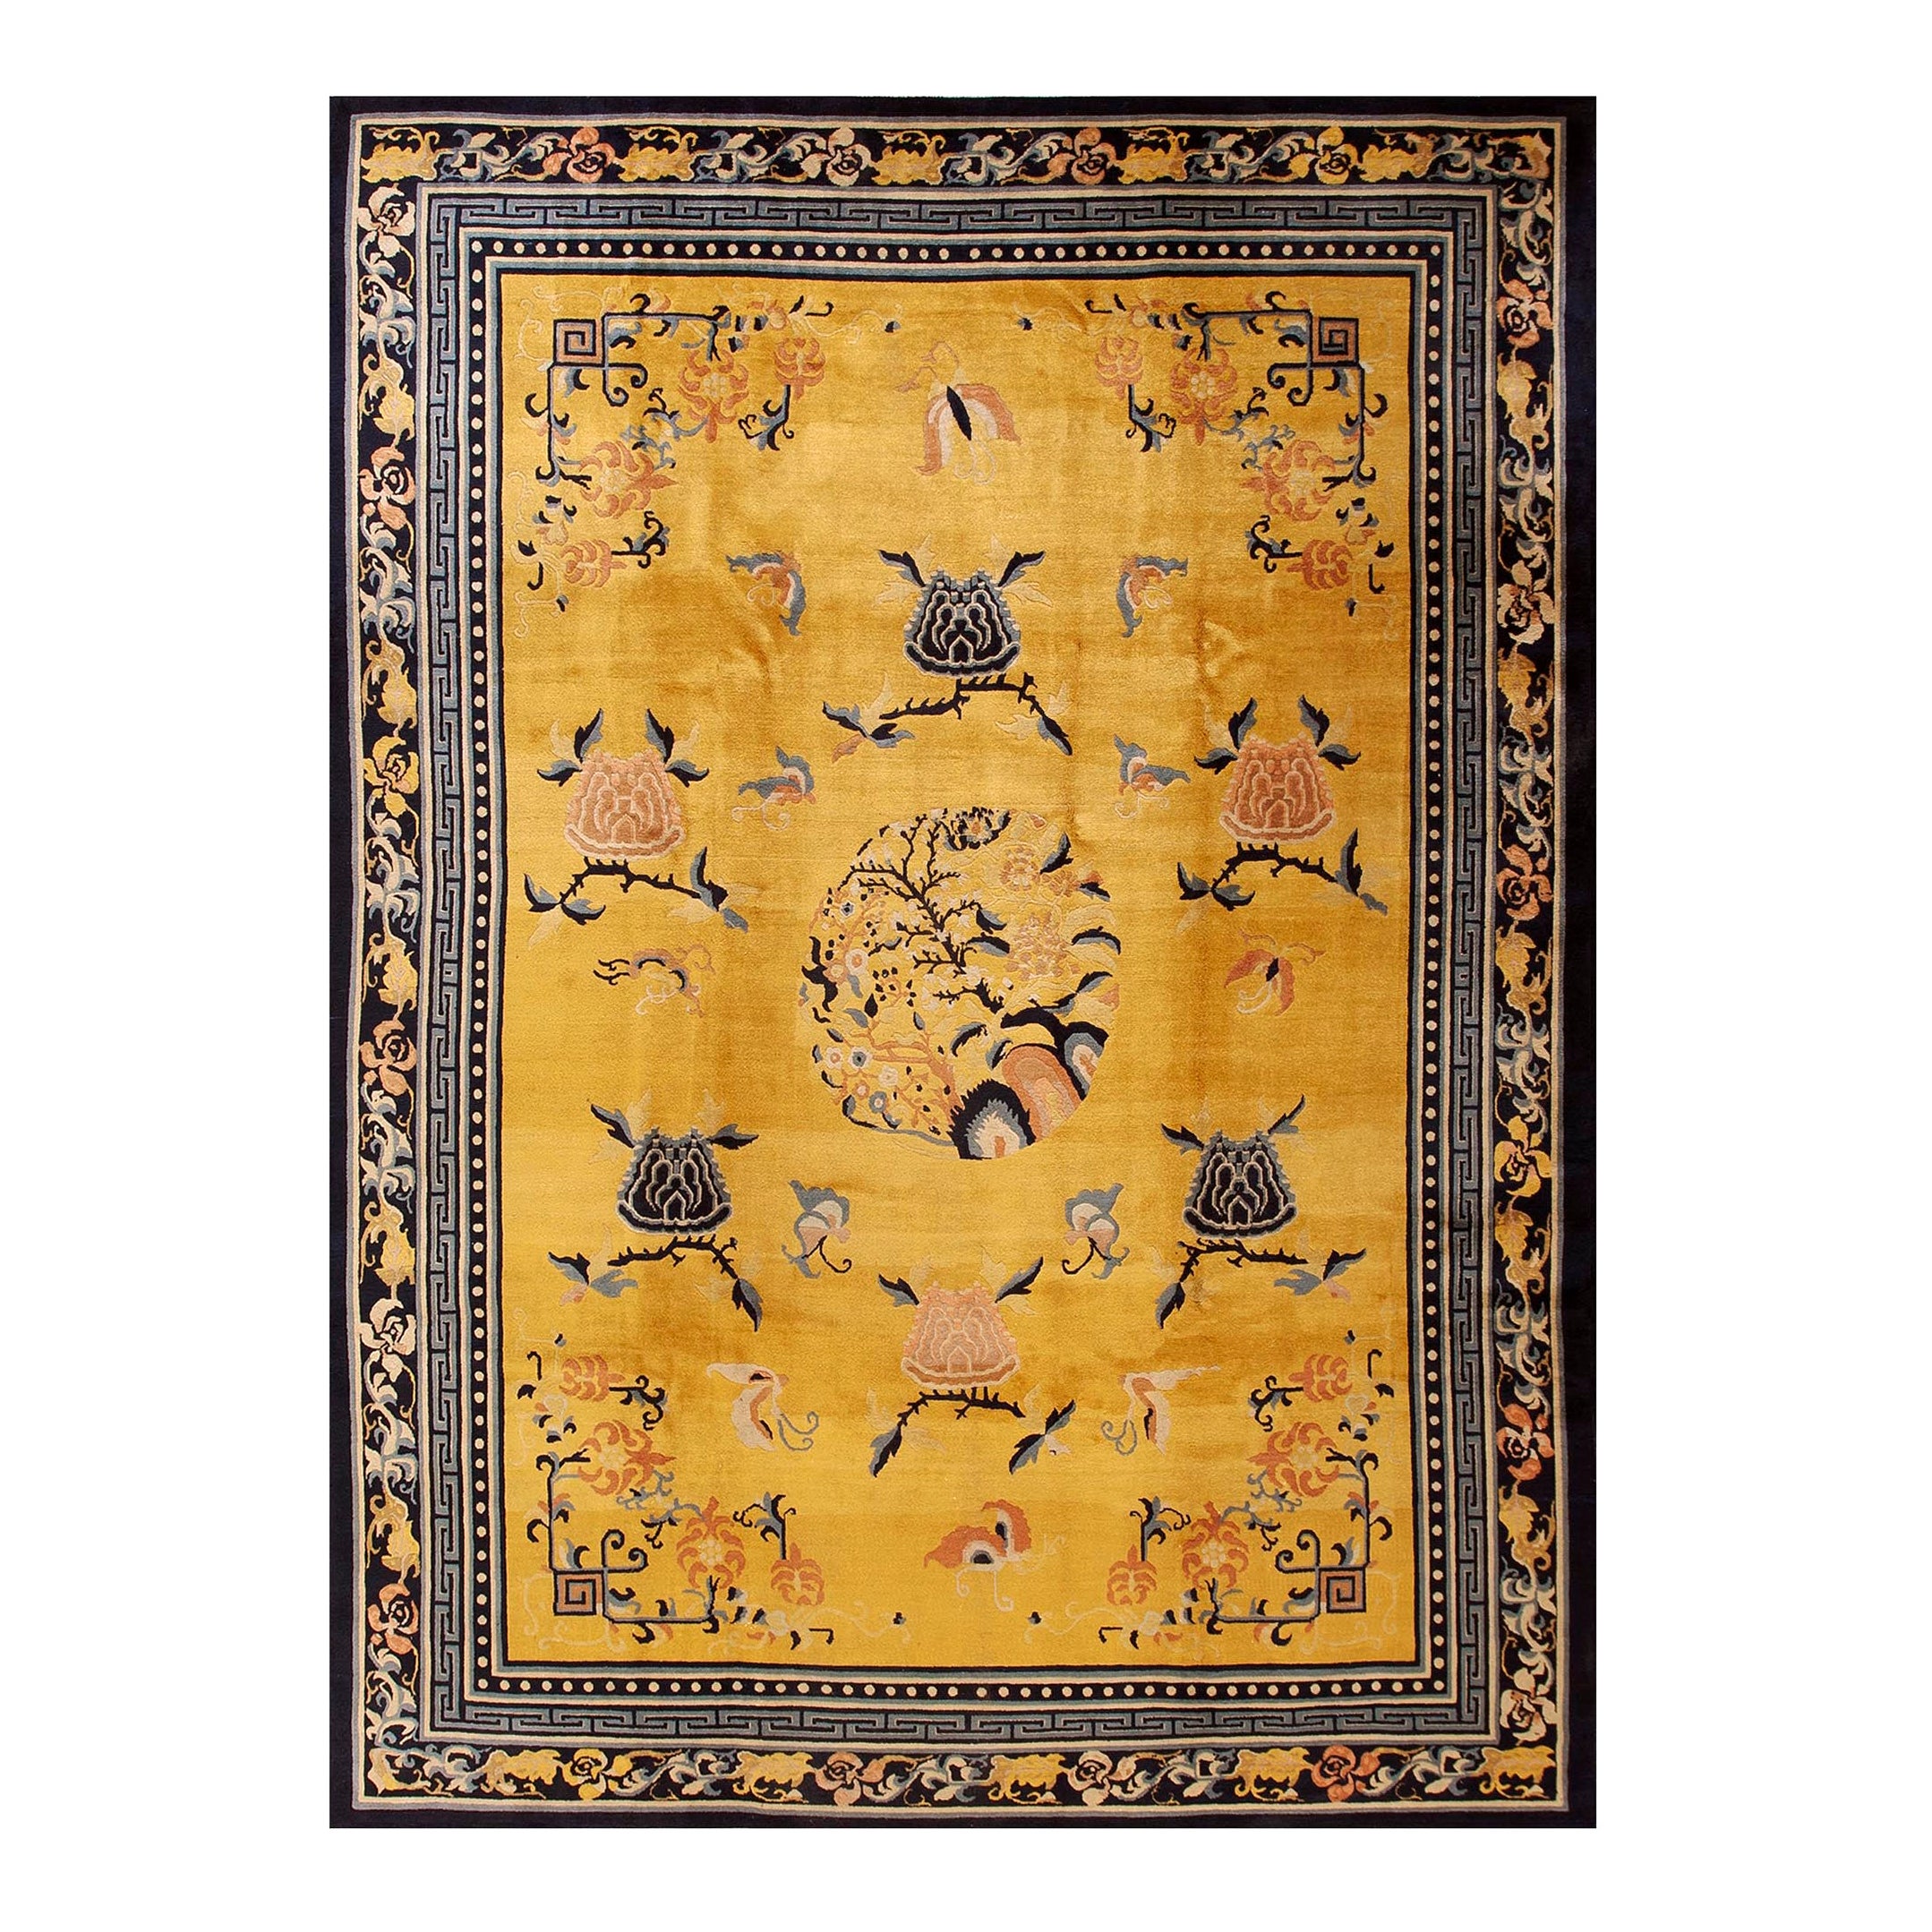 Antique Chinese Rug 9' 0" x 11' 10"